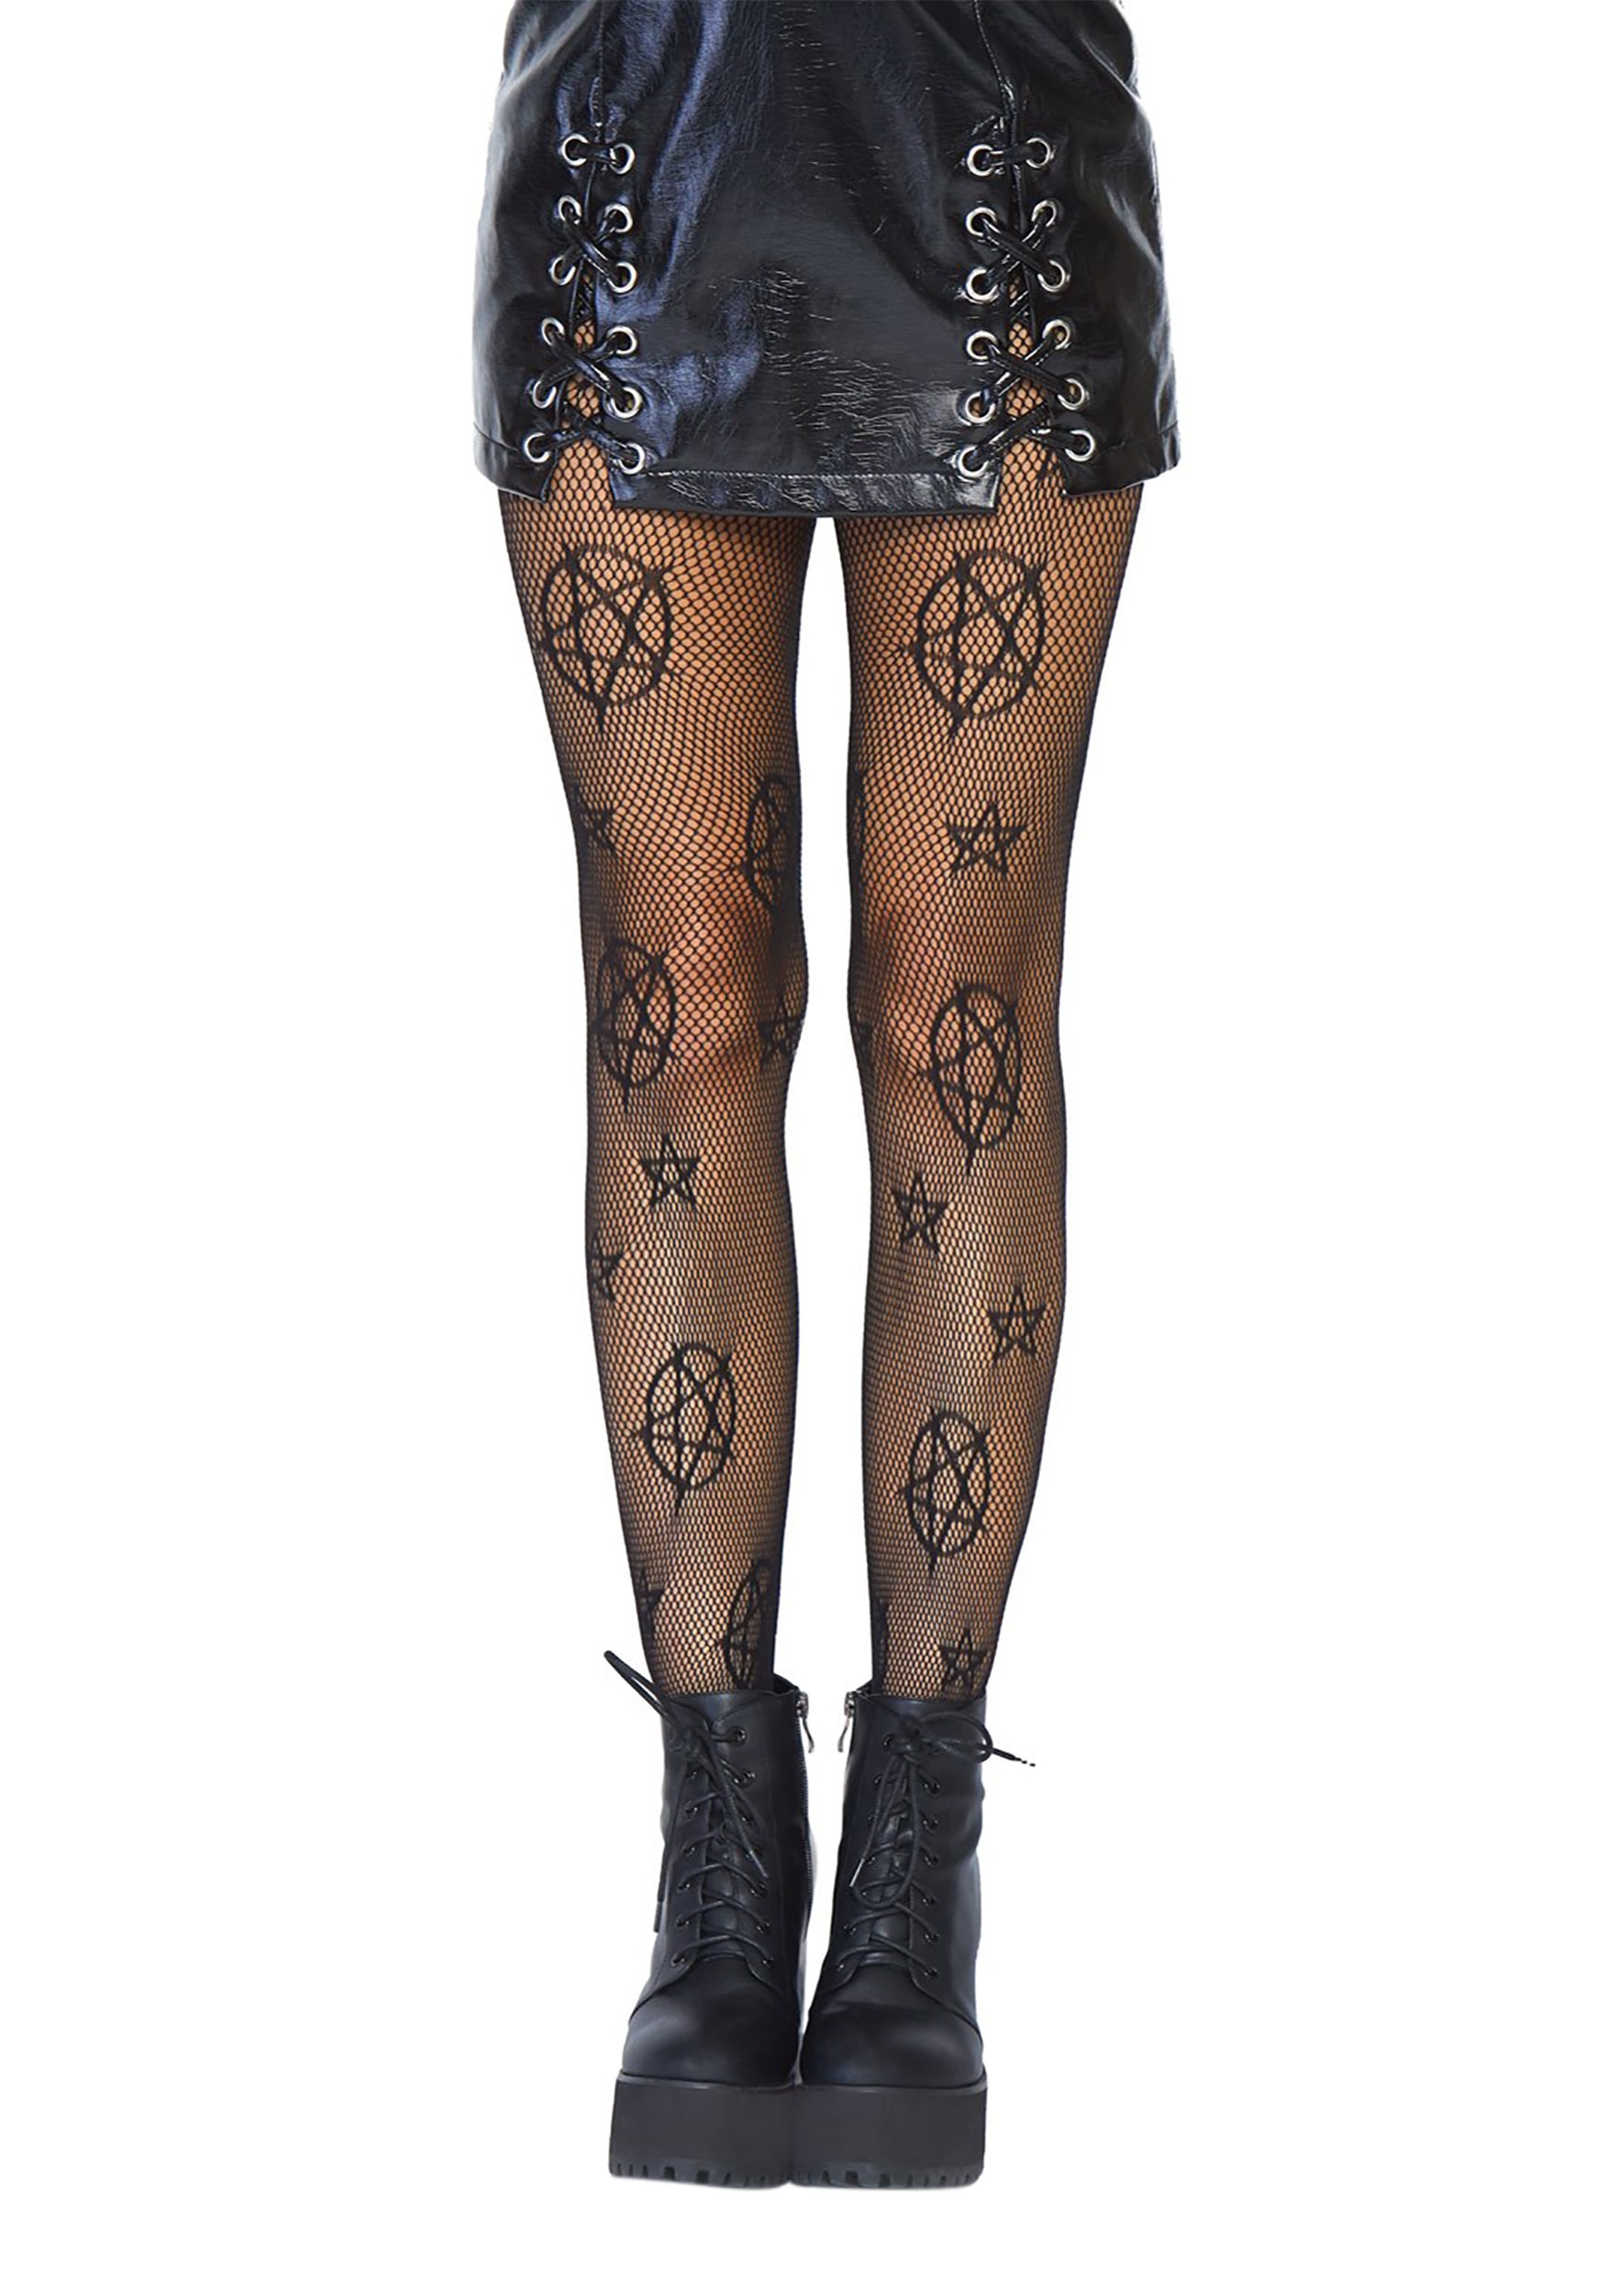 Occult Net Tights for Women